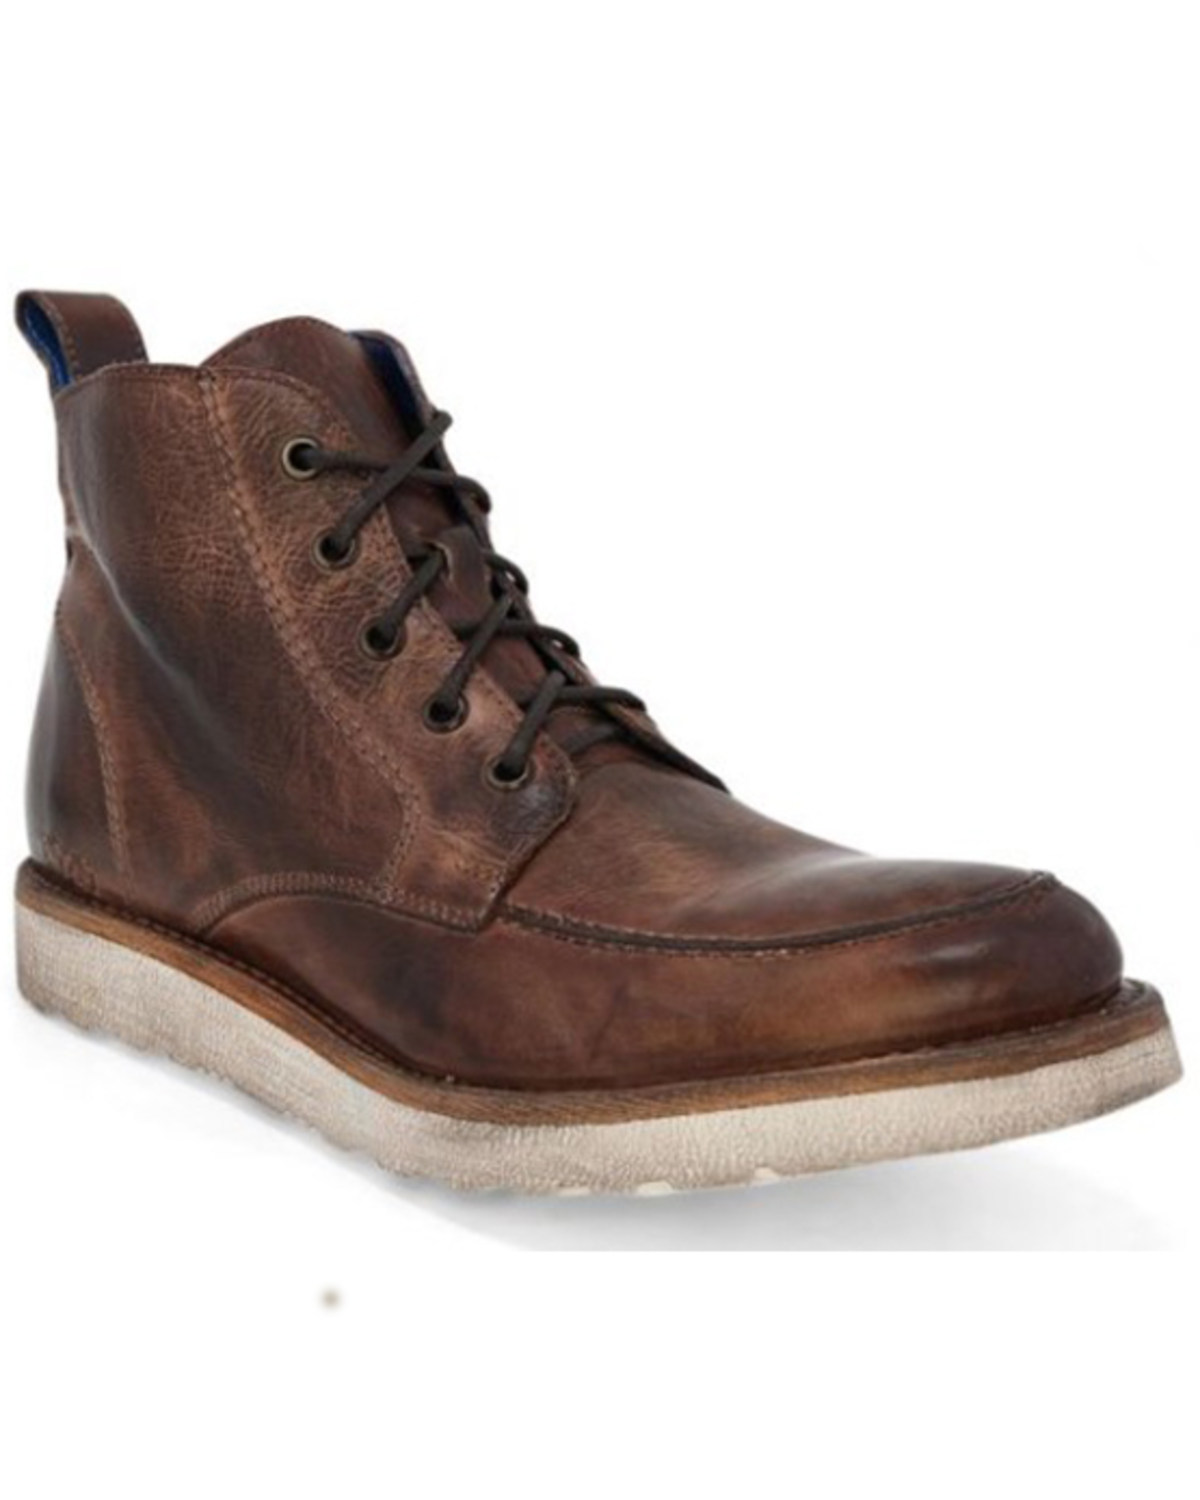 Bed Stu Men's Lincoln Western Casual Boots